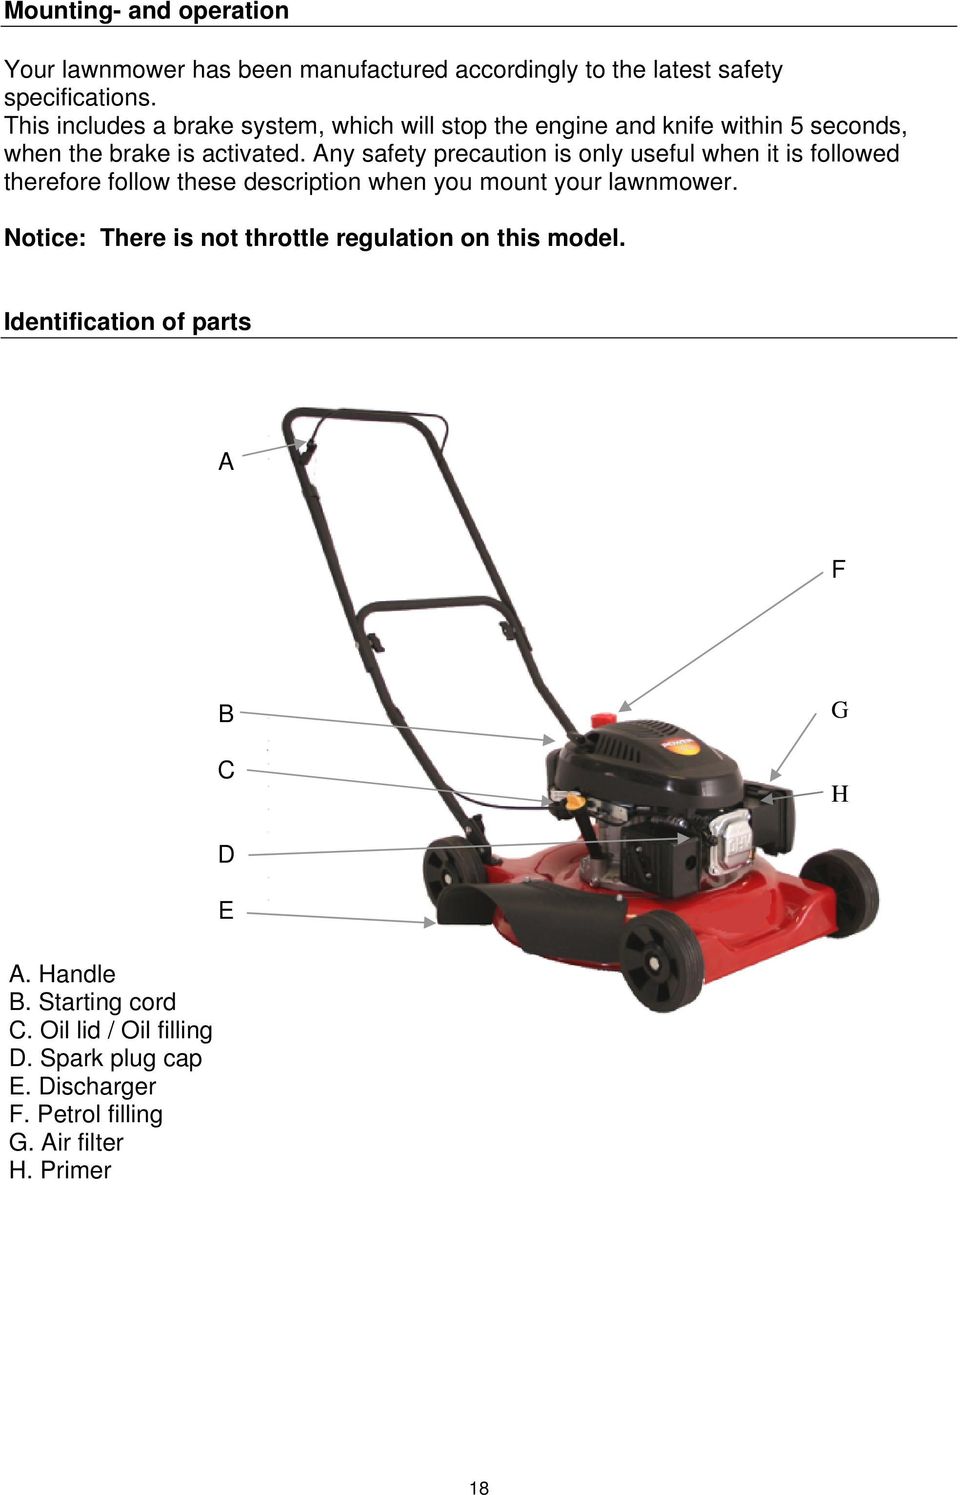 Any safety precaution is only useful when it is followed therefore follow these description when you mount your lawnmower.